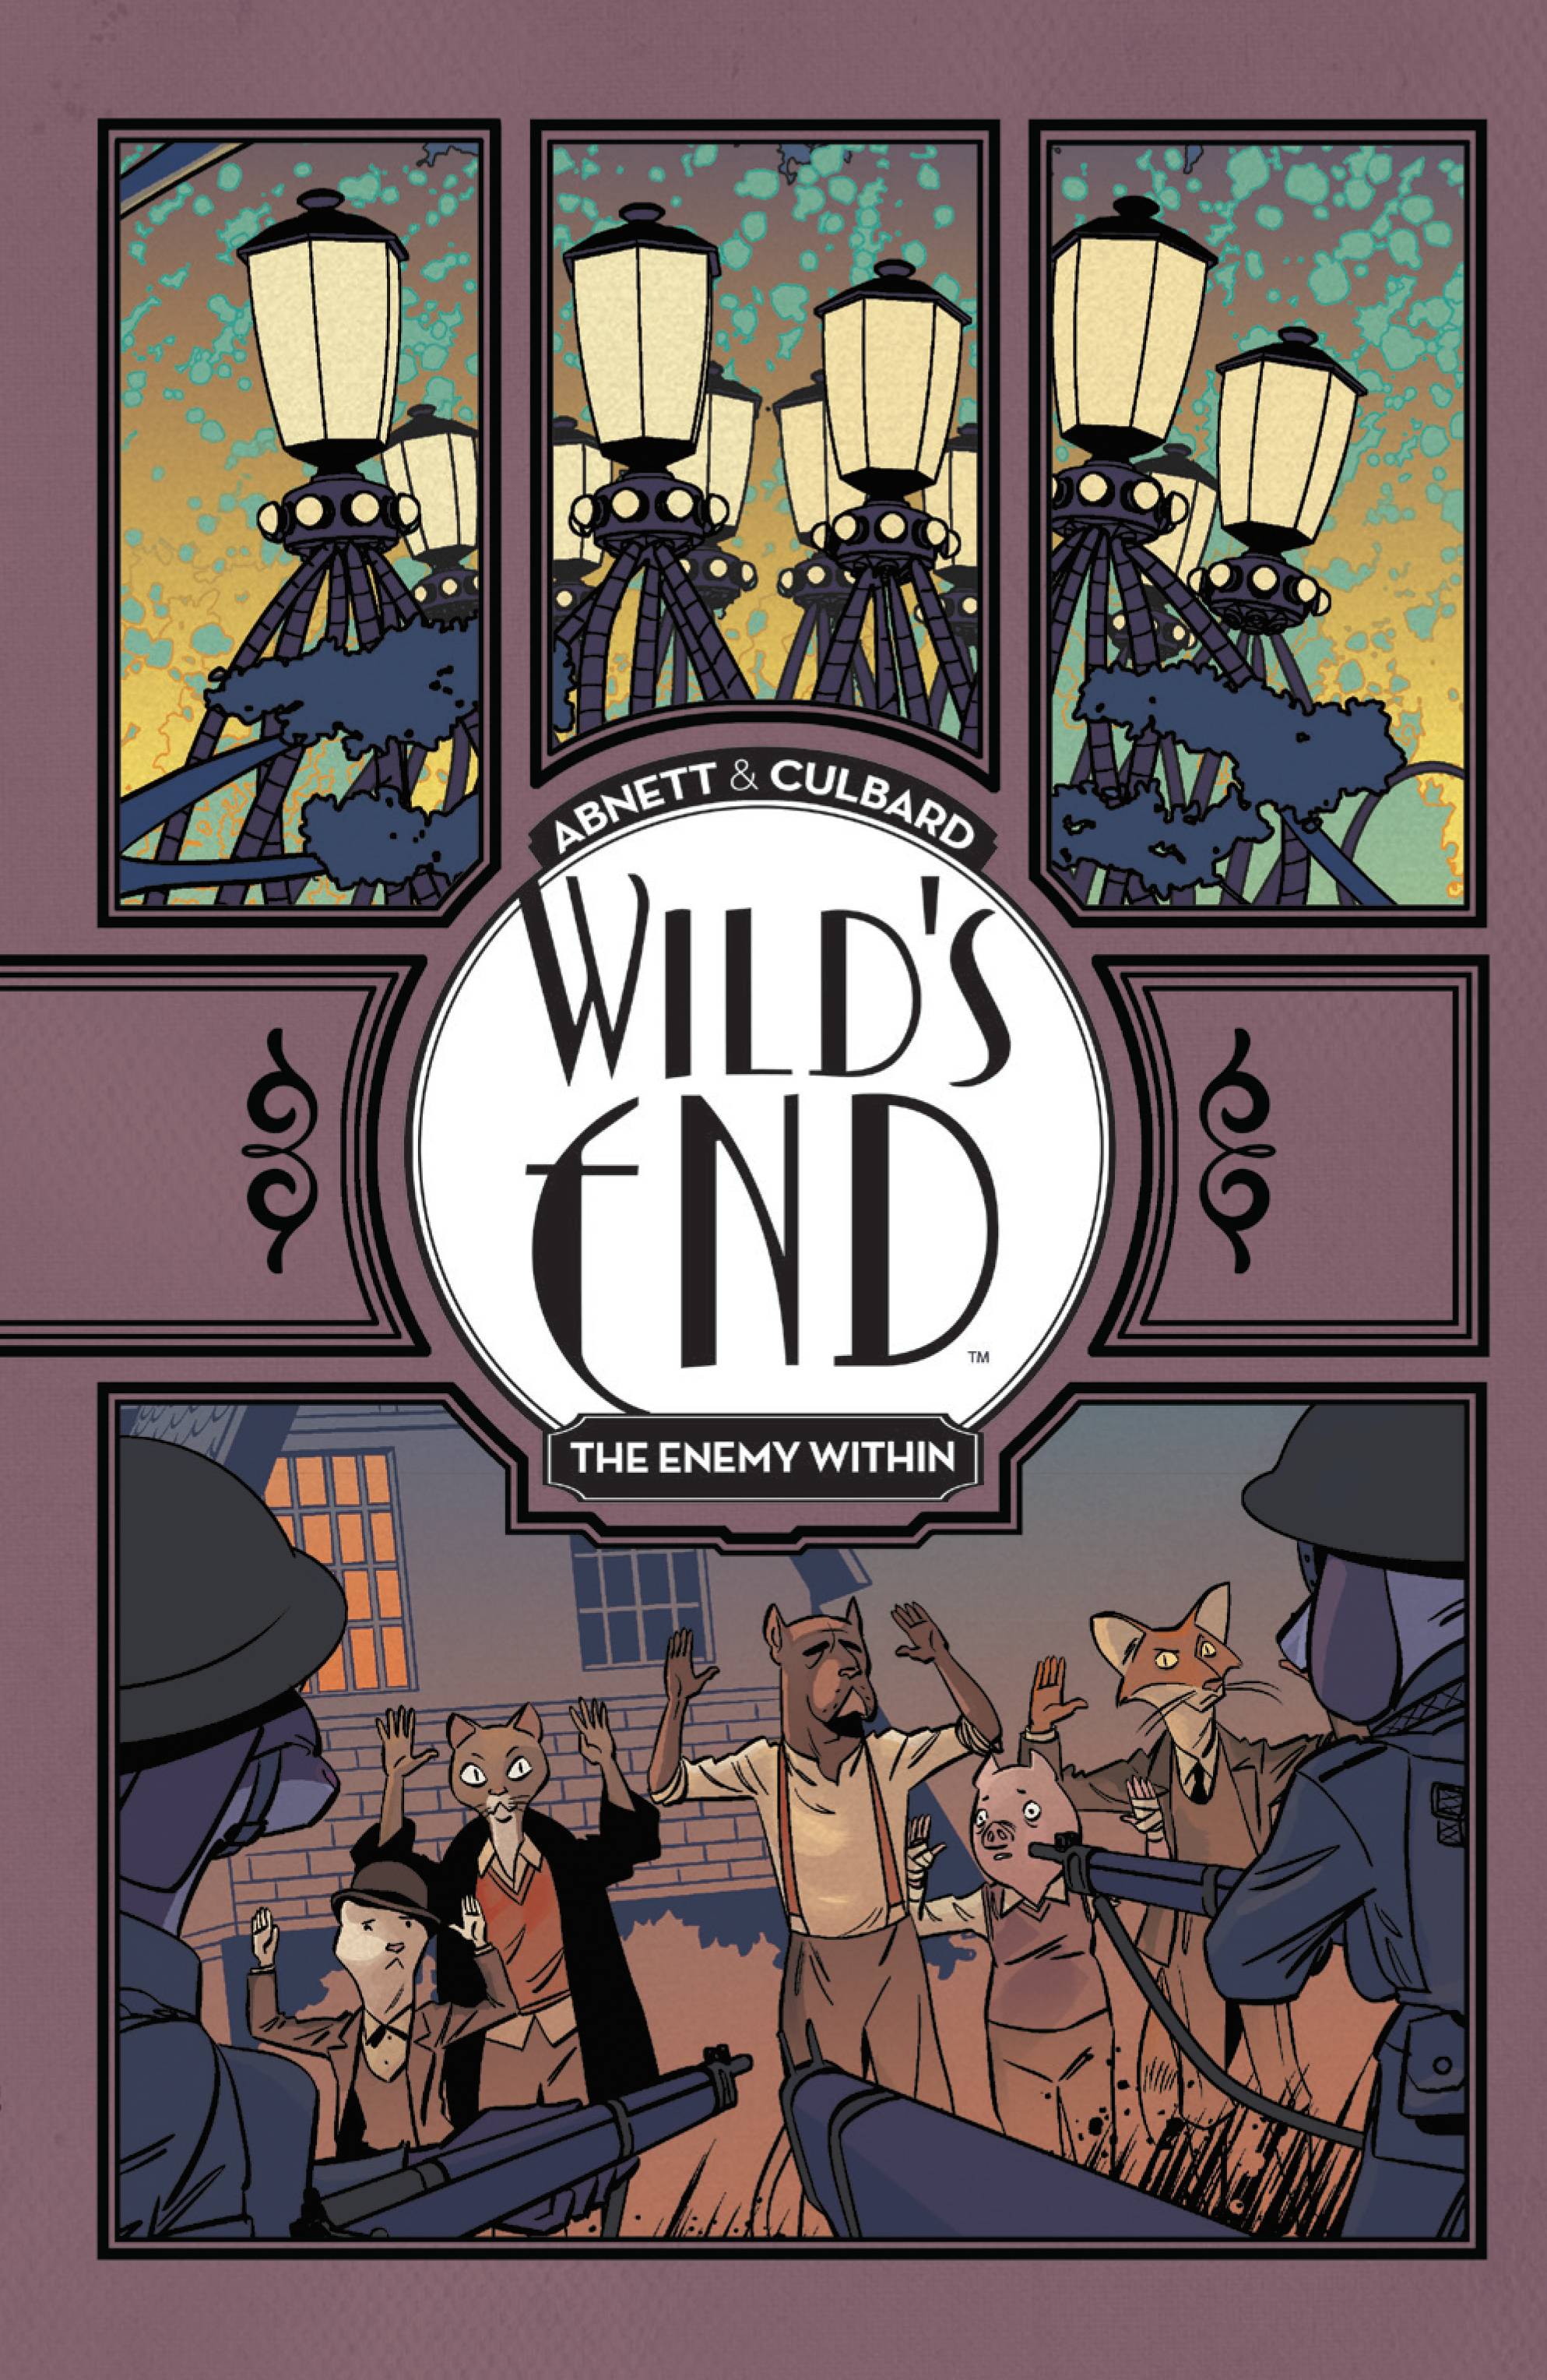 WILDS END TP VOL 02 ENEMY WITHIN